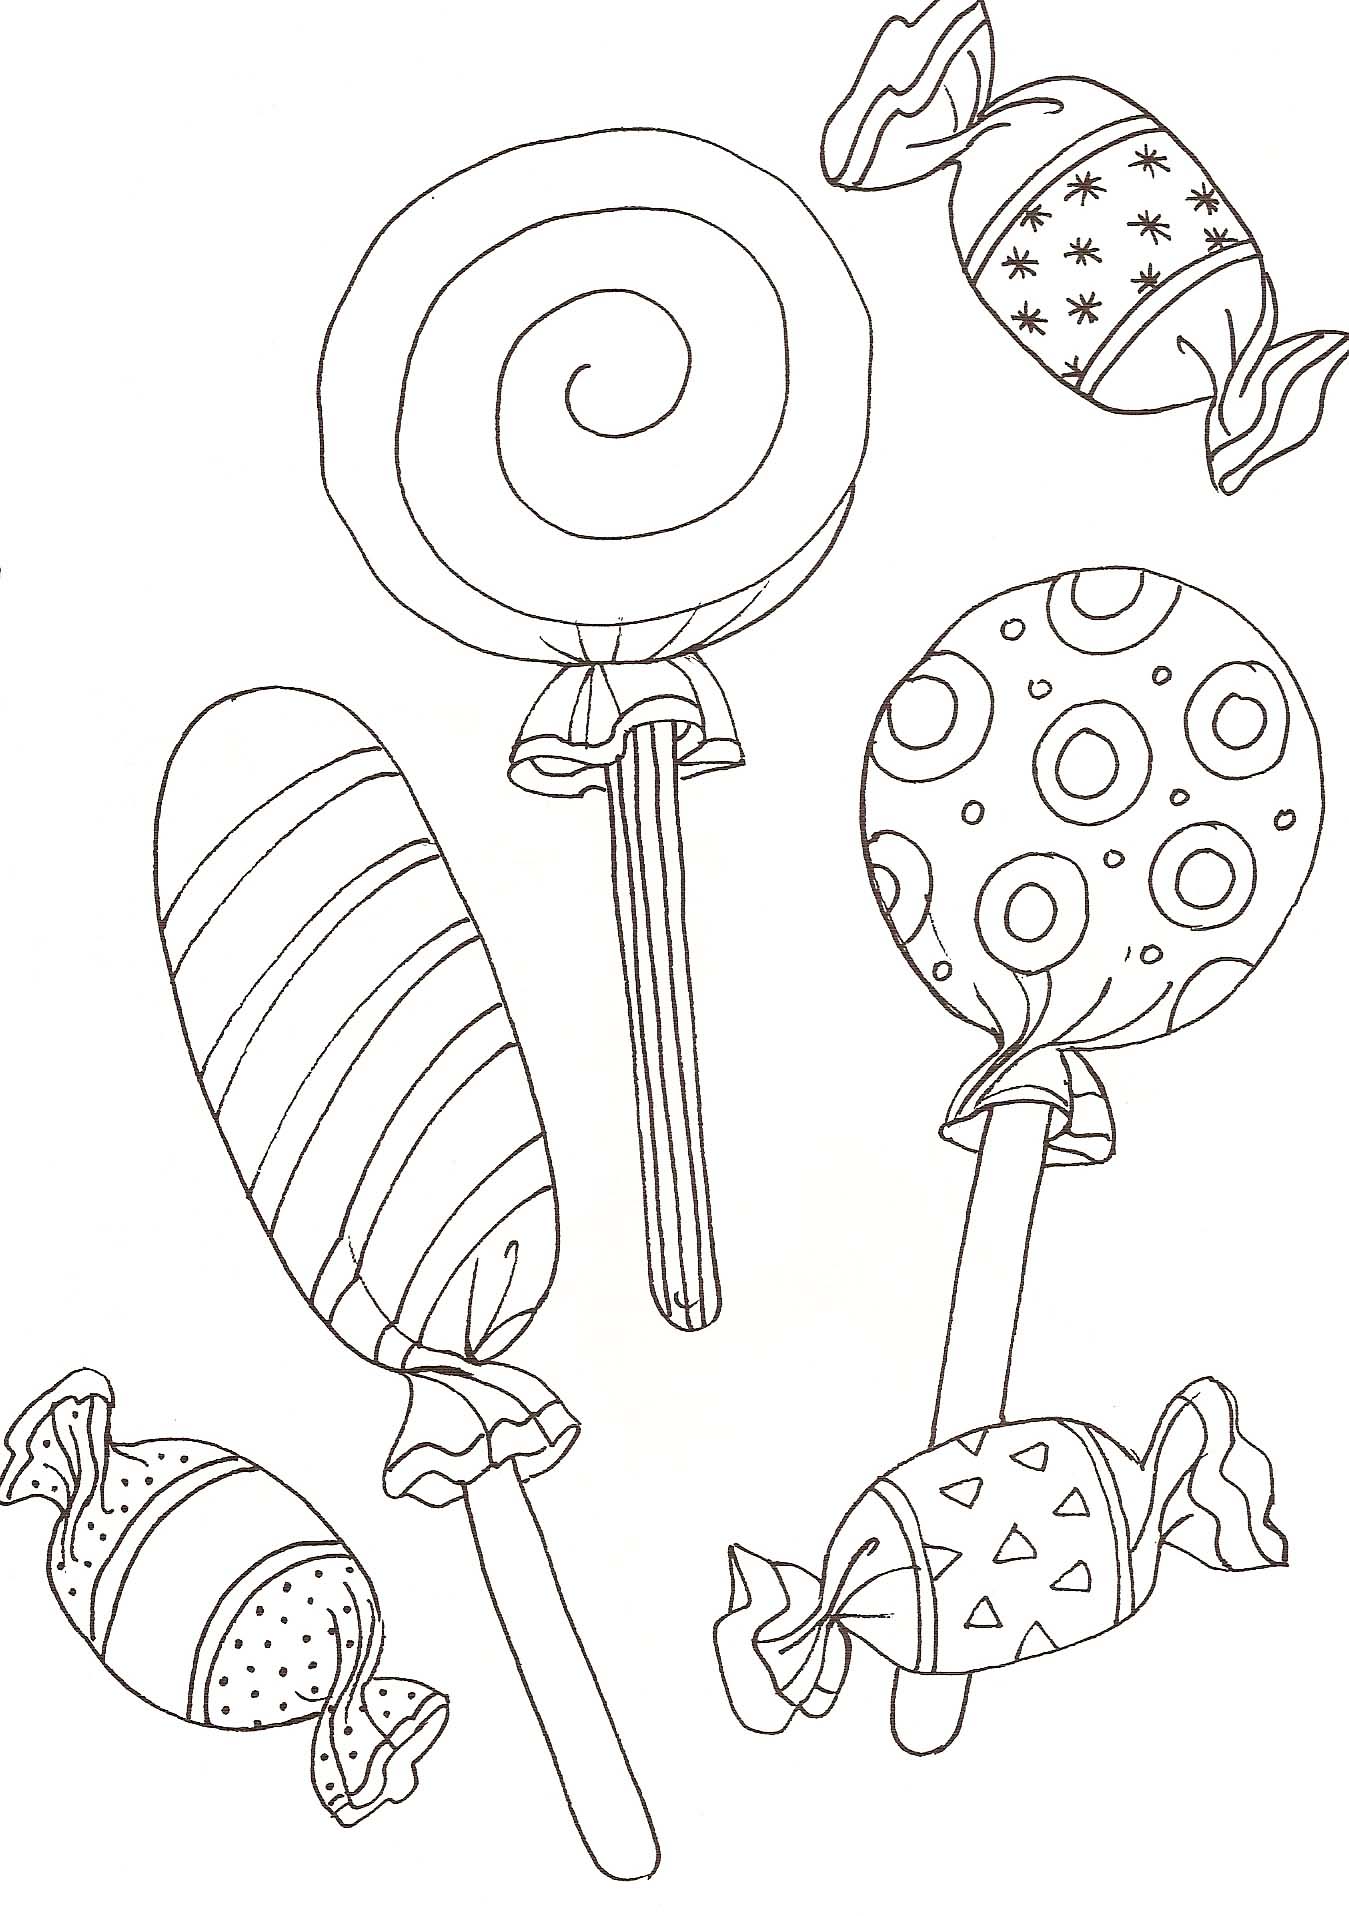 Lolly's Coloring Pages - Coloring Home